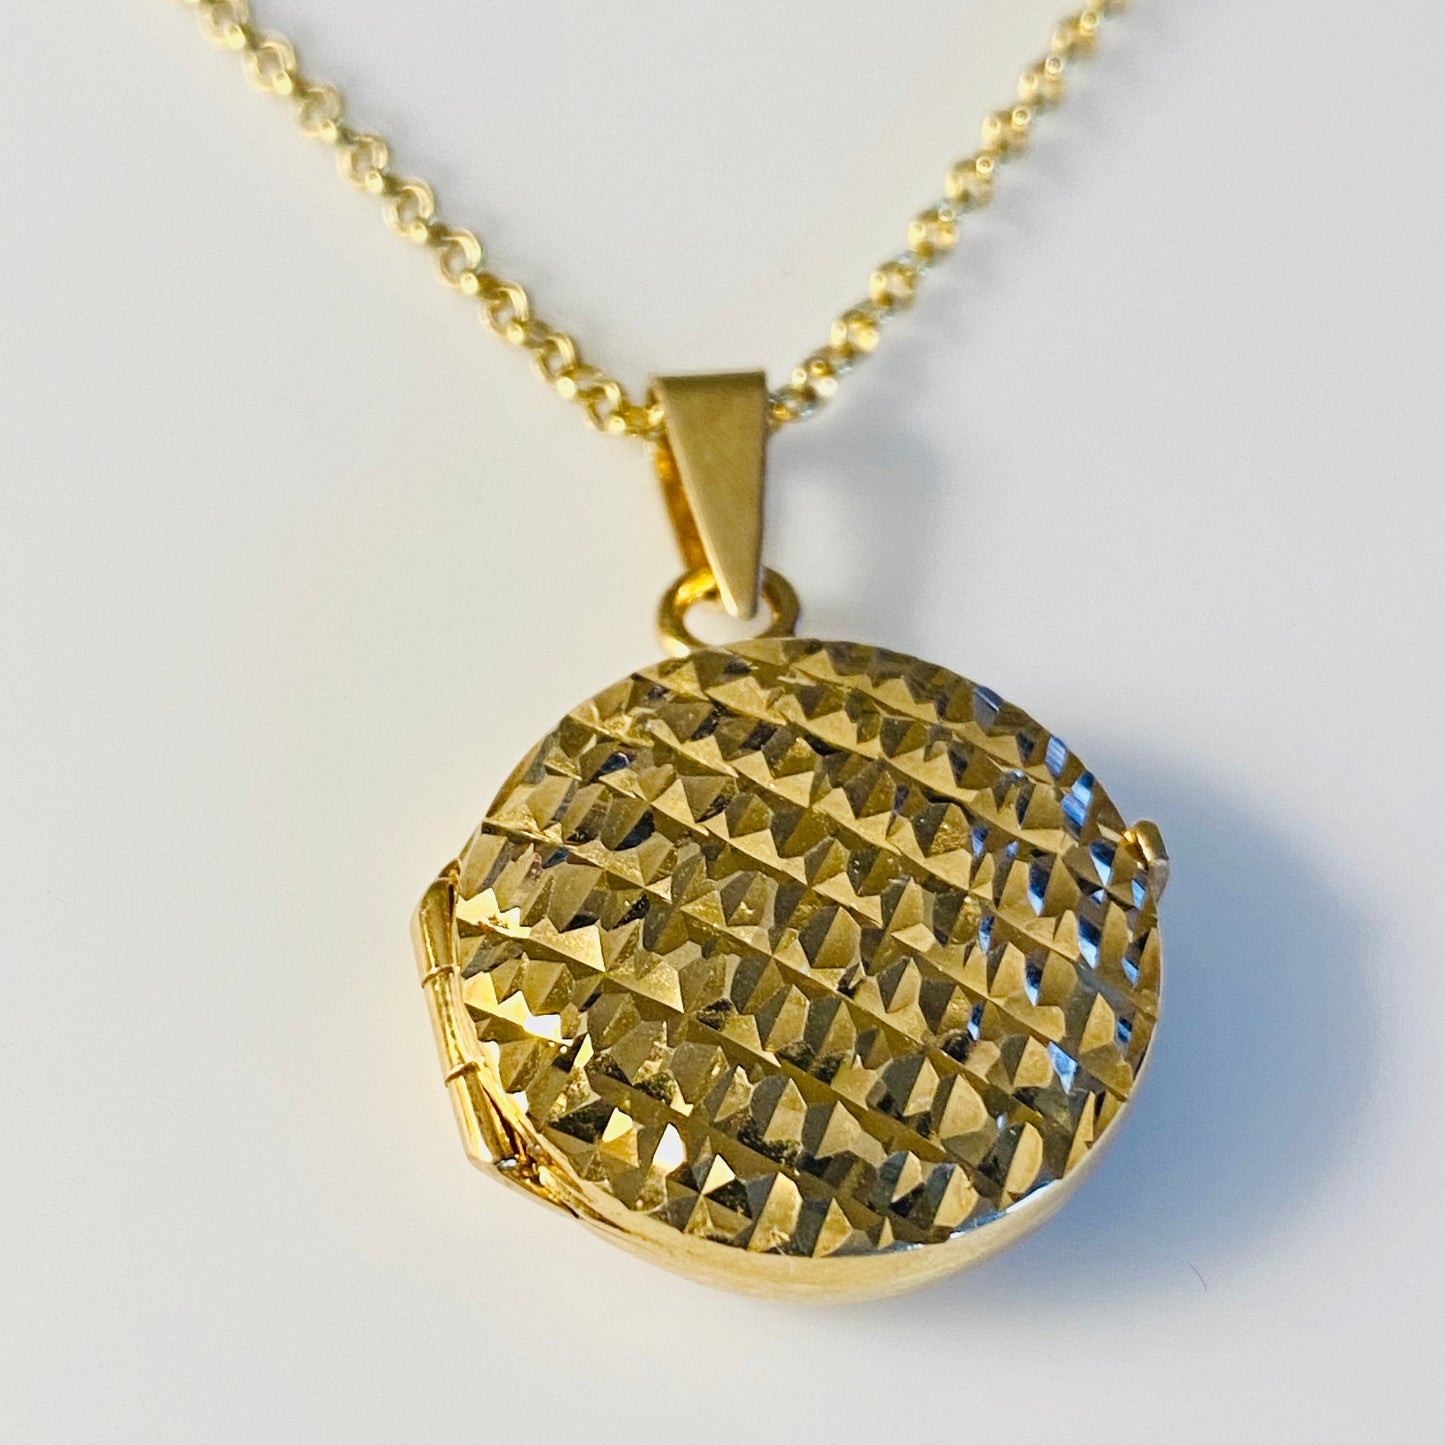 This 925 silver yellow gold plated round locket holds two photos.  It has a polished finish on the back and an intricate diamond cut pattern on the front.  It can be engraved on the back.  It hangs from a 925 silver yellow gold plated  46cm mini belcher chain.  This is so classic and stylish.  A completely "wear anytime" piece. Engraving is free of charge.